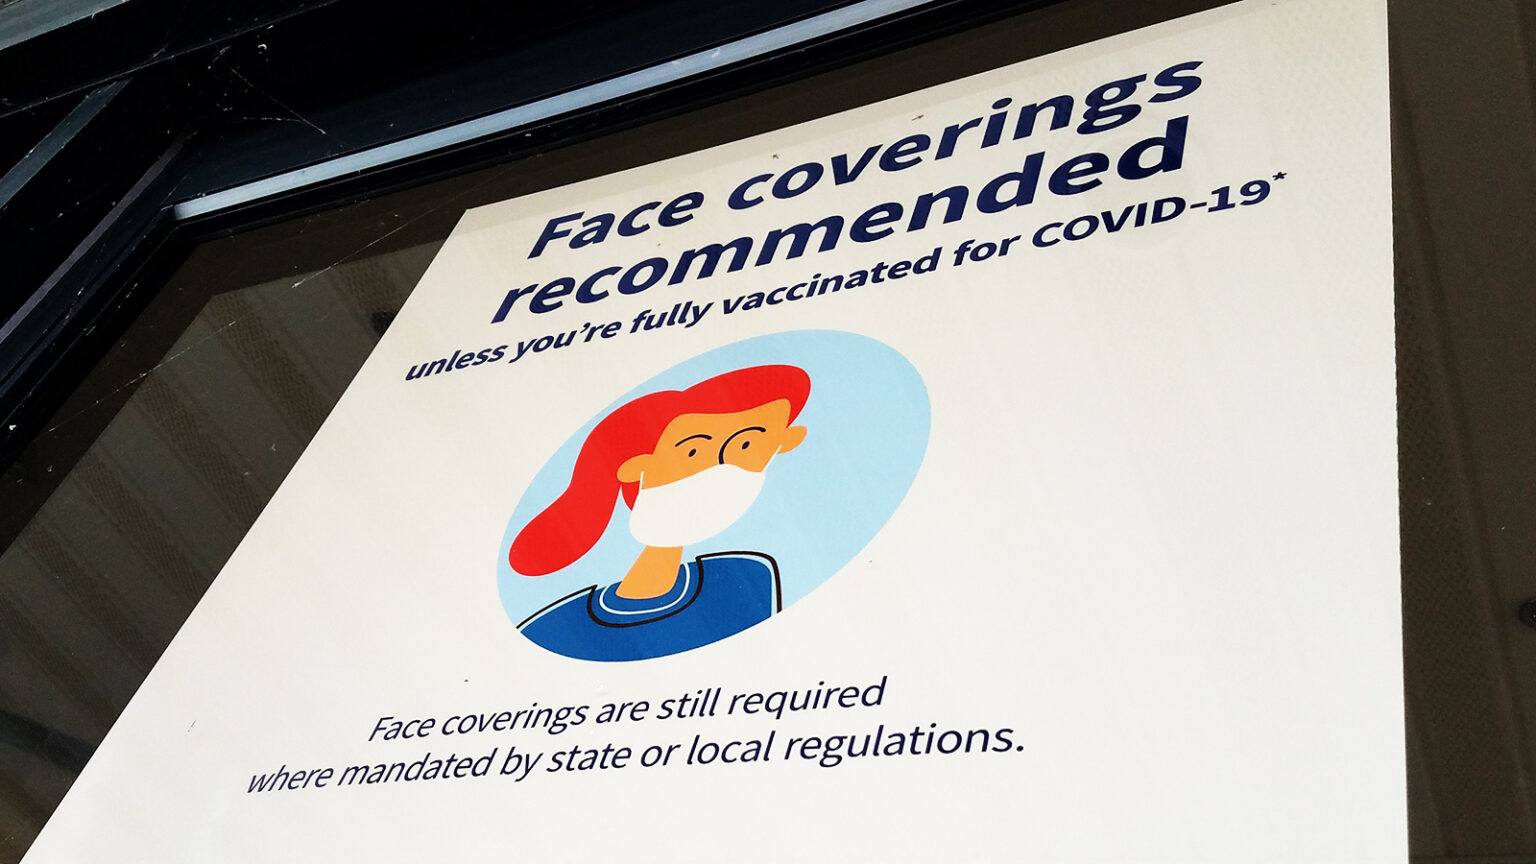 A window reads Face coverins recommended unless you're fully vaccinated for COVID-19 — Face coverings are still required where mandated by state or local regulations.